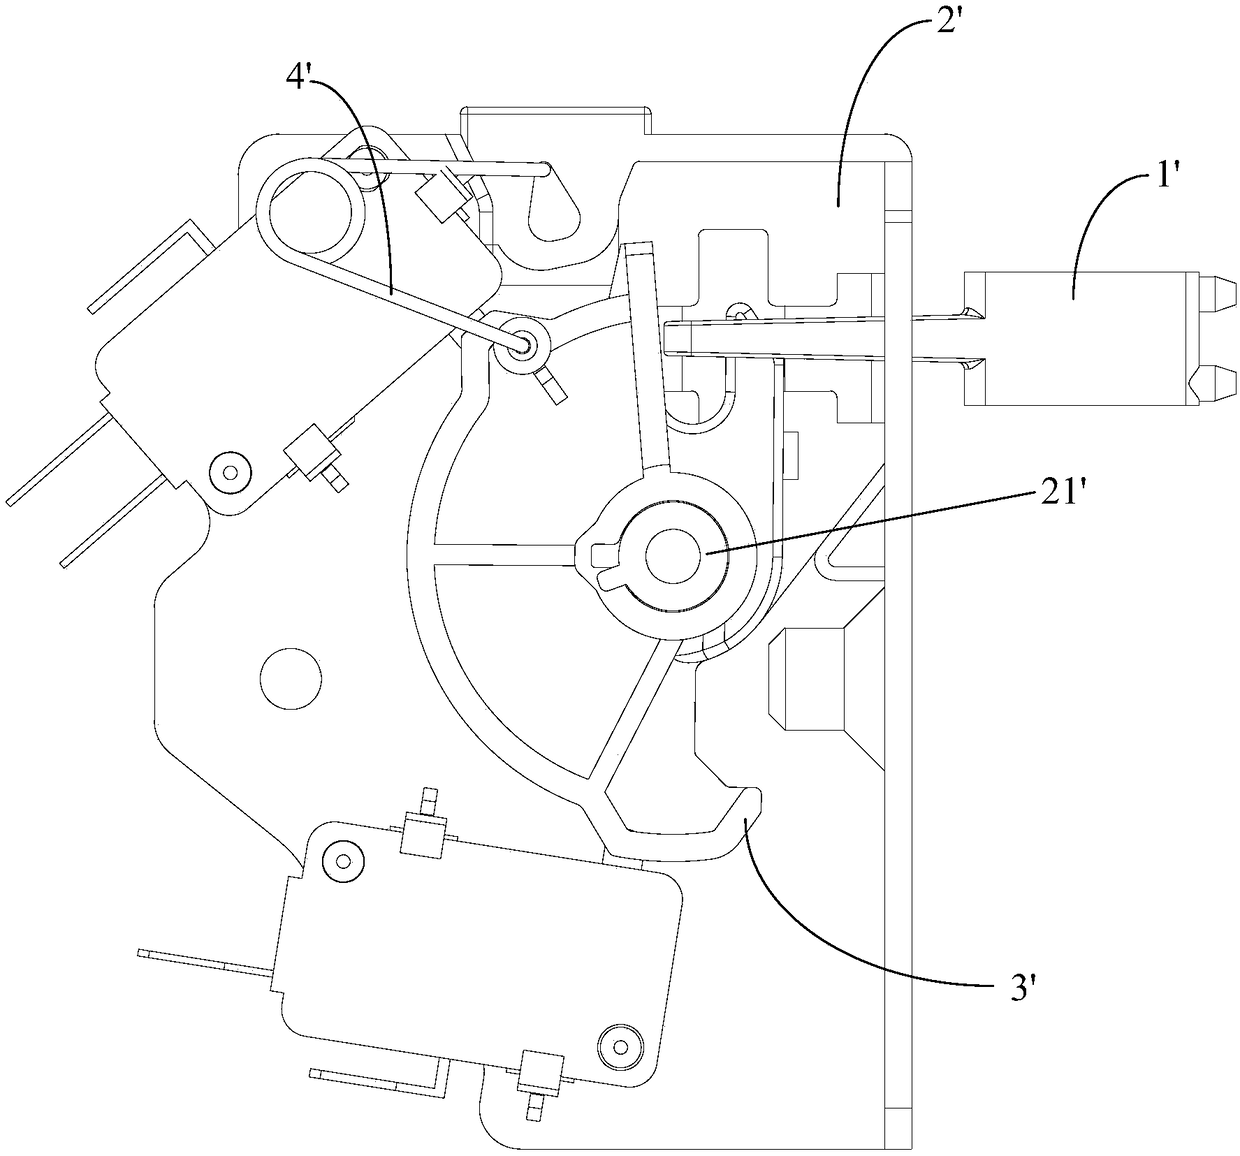 Interlocking components and cooking appliances